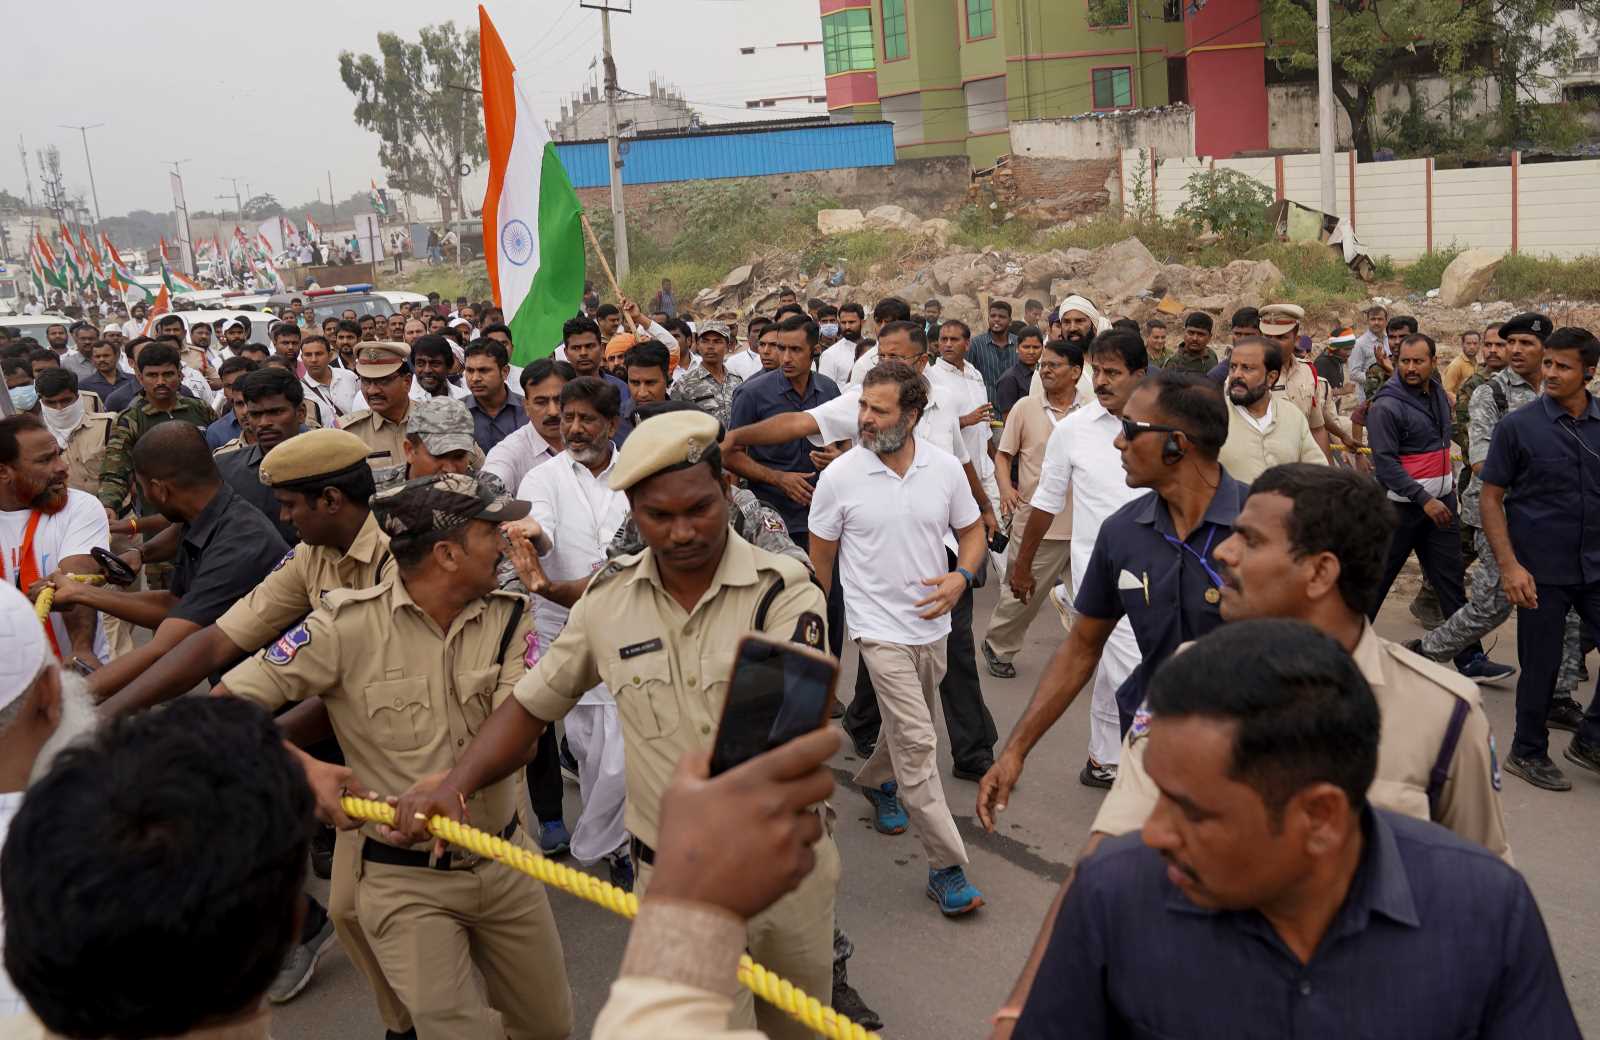 Rahul Gandhi (centre, blue shoes) and followers walking through Hyderabad in early November.